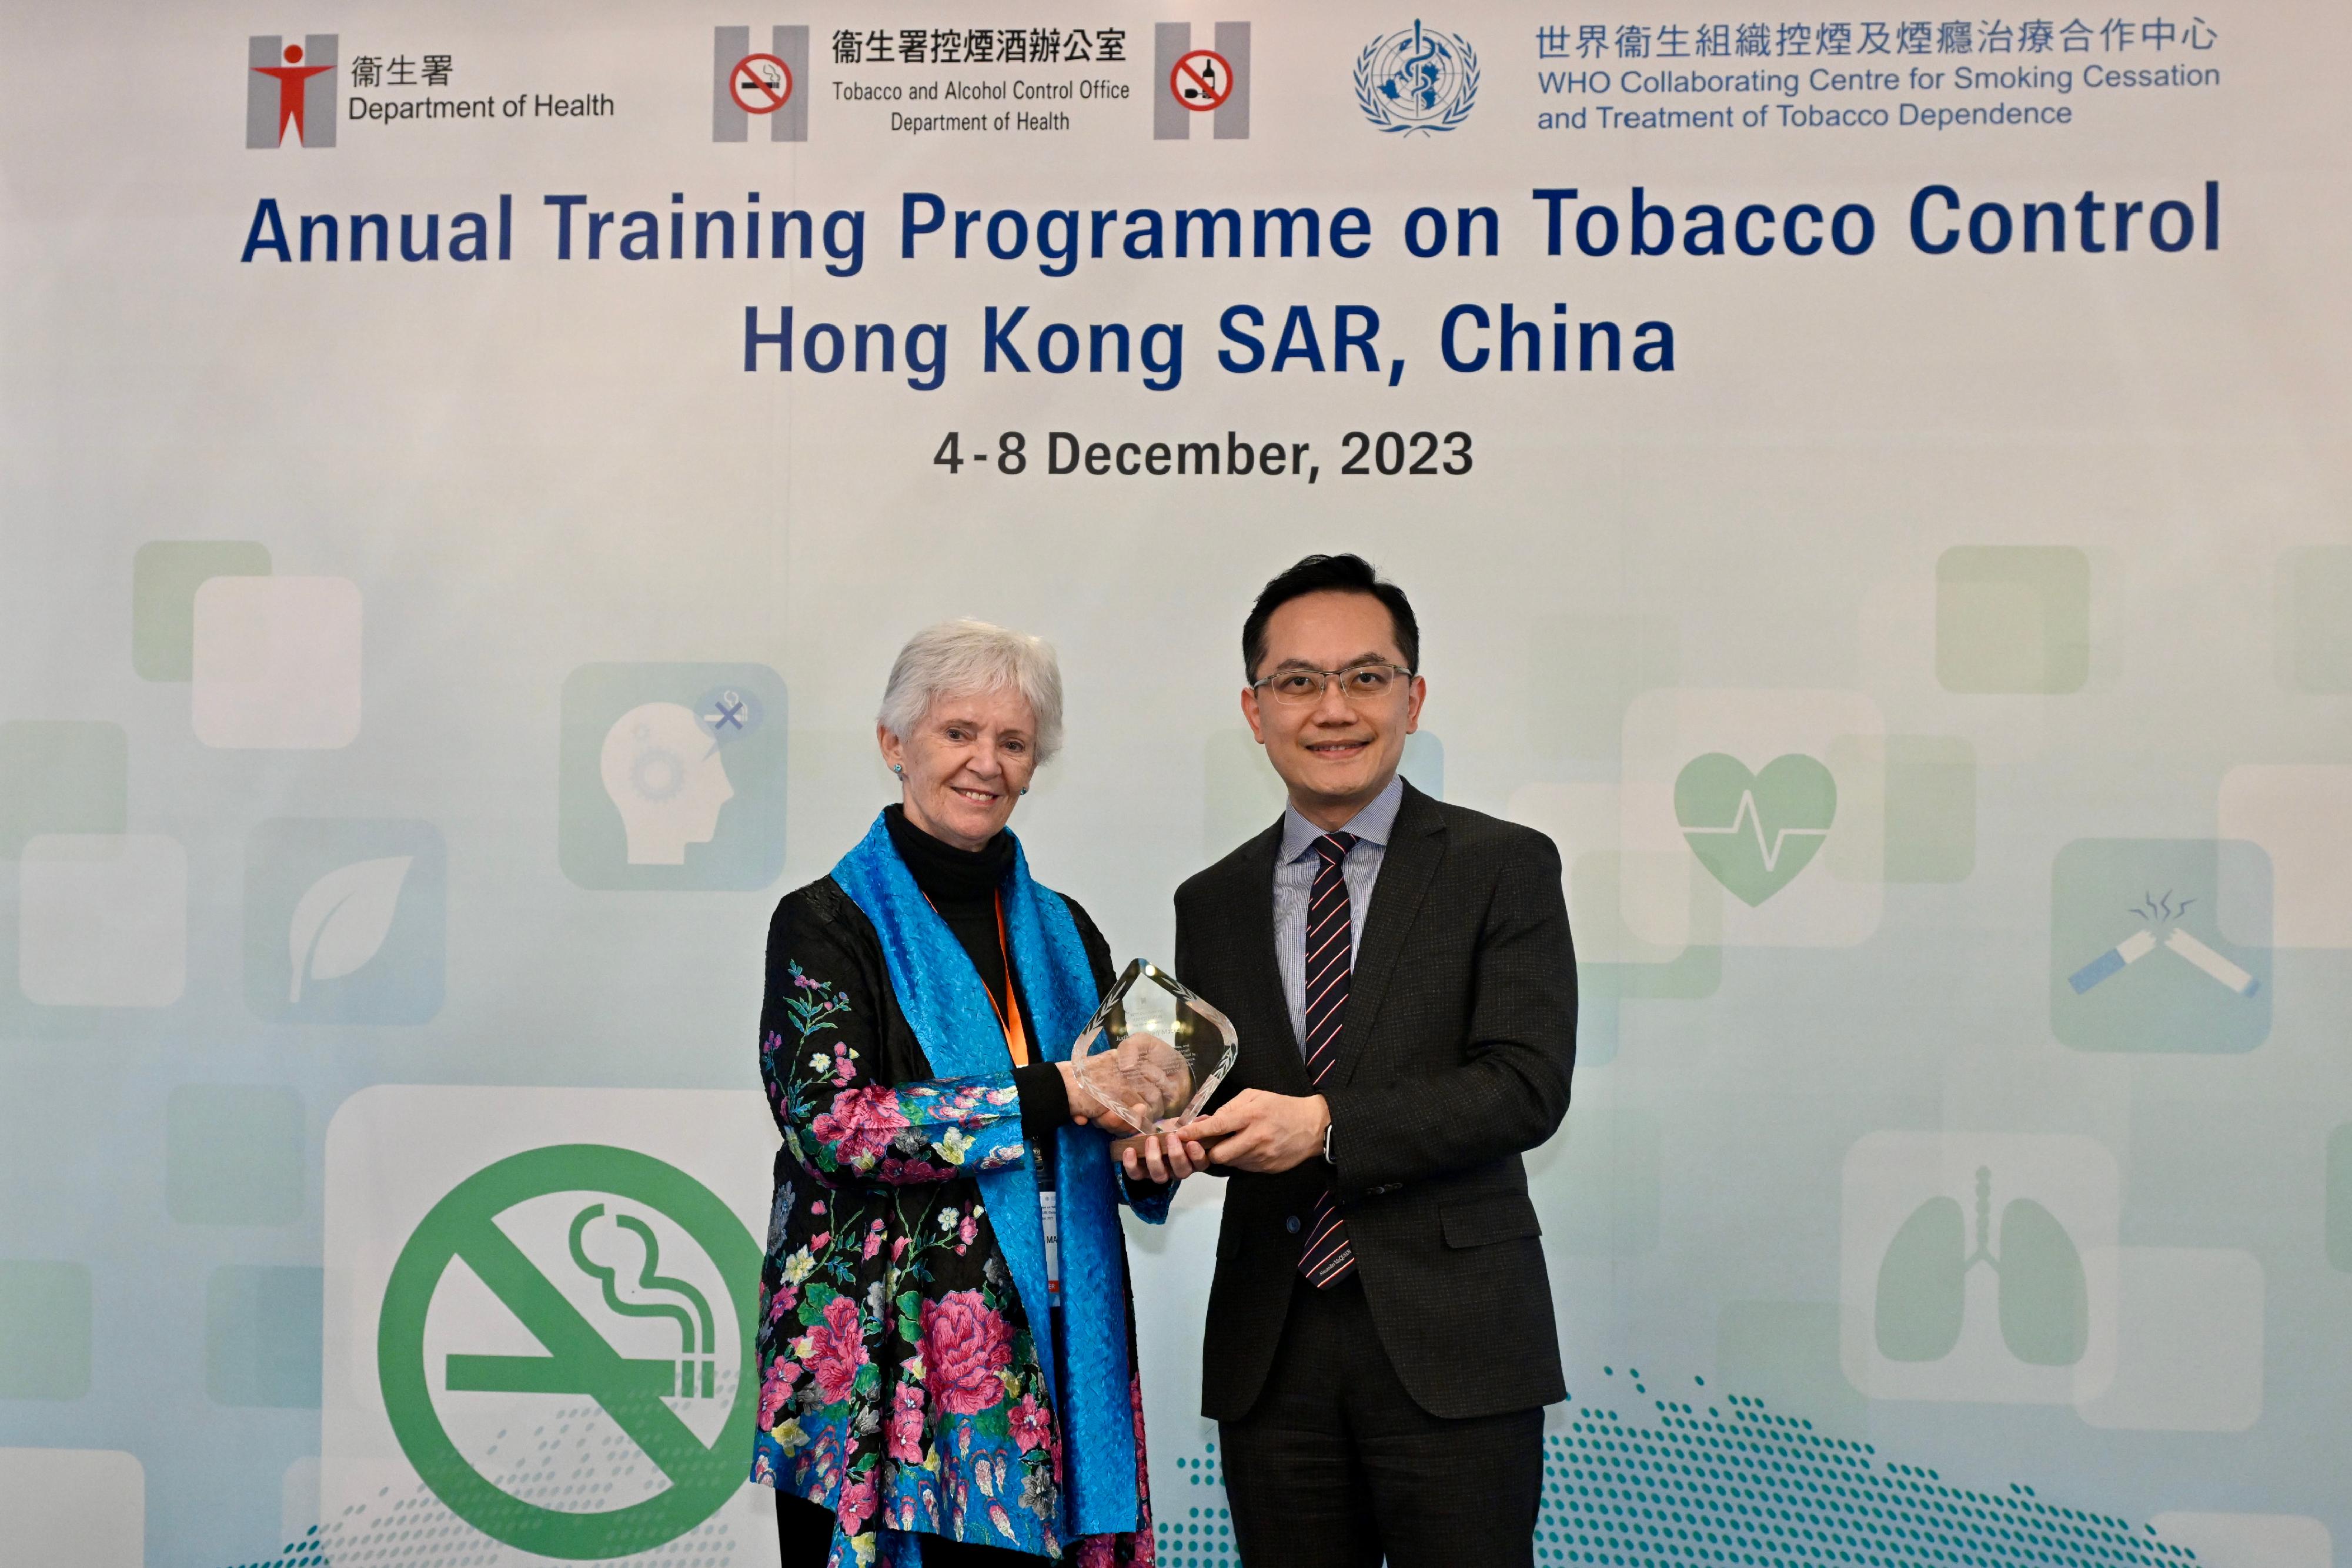 The Tobacco and Alcohol Control Office of the Department of Health organised the five-day Annual Training Programme on Tobacco Control 2023, and the closing ceremony was held today (December 7). Photo shows the Director of Health, Dr Ronald Lam (right), presenting a souvenir to one of the speakers, Senior Policy Adviser to the World Health Organization Professor Judith Mackay (left).